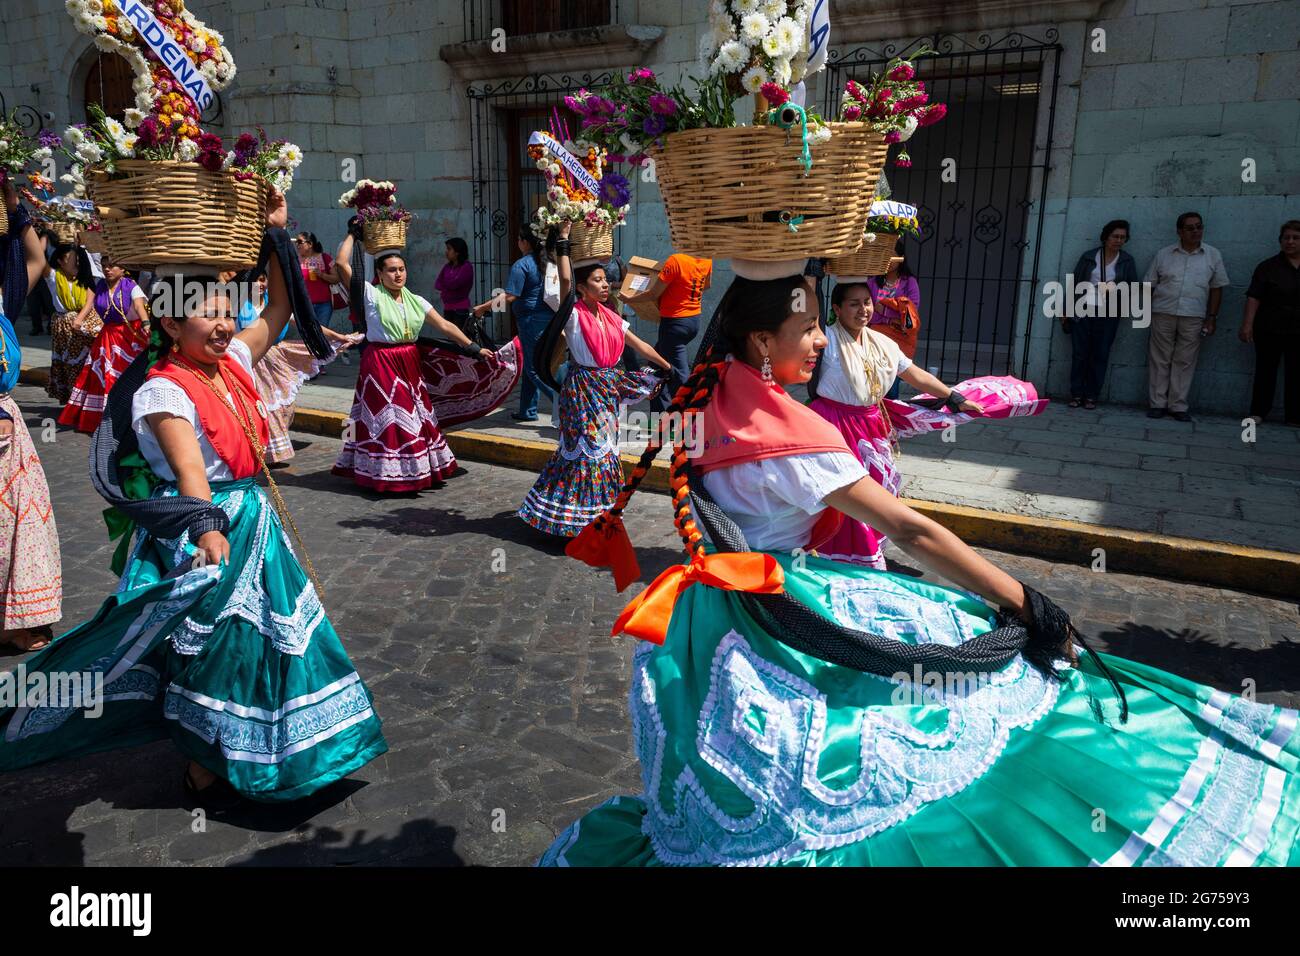 Oaxaca de Juarez, Mexico - May 15, 2014: A group of women wearing  traditional colorful dresses and carrying baskets with flowers, dancing in  a street Stock Photo - Alamy